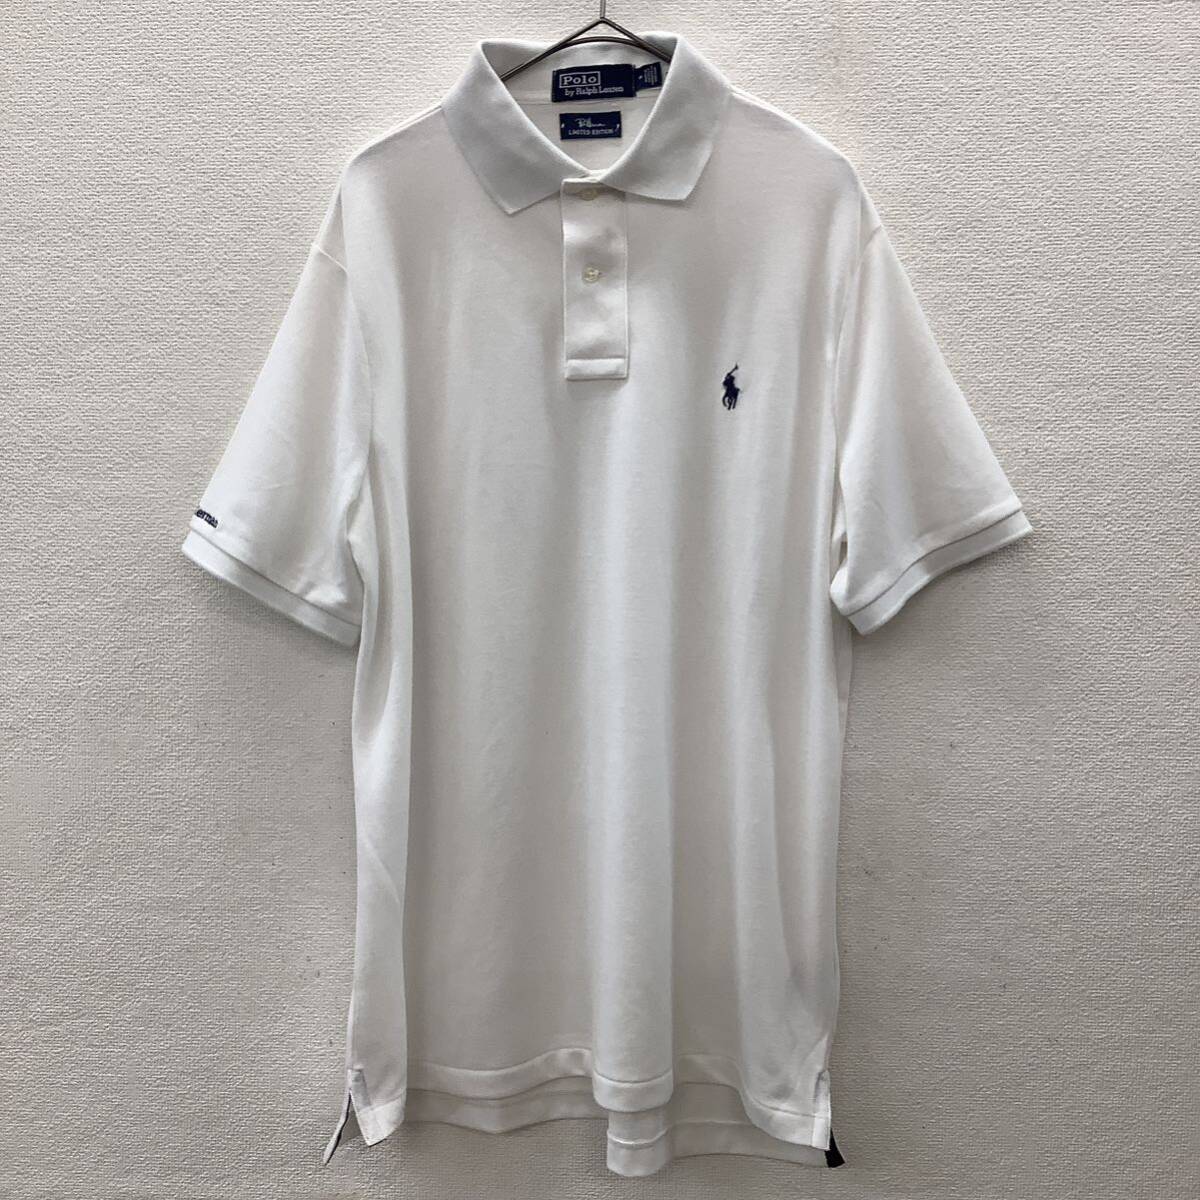 Polo Ralph Lauren for Ron Herman The Earth Polo ロンハーマン別注 ポロバイラルフローレン ポロシャツ ホワイト size M 77163の画像2